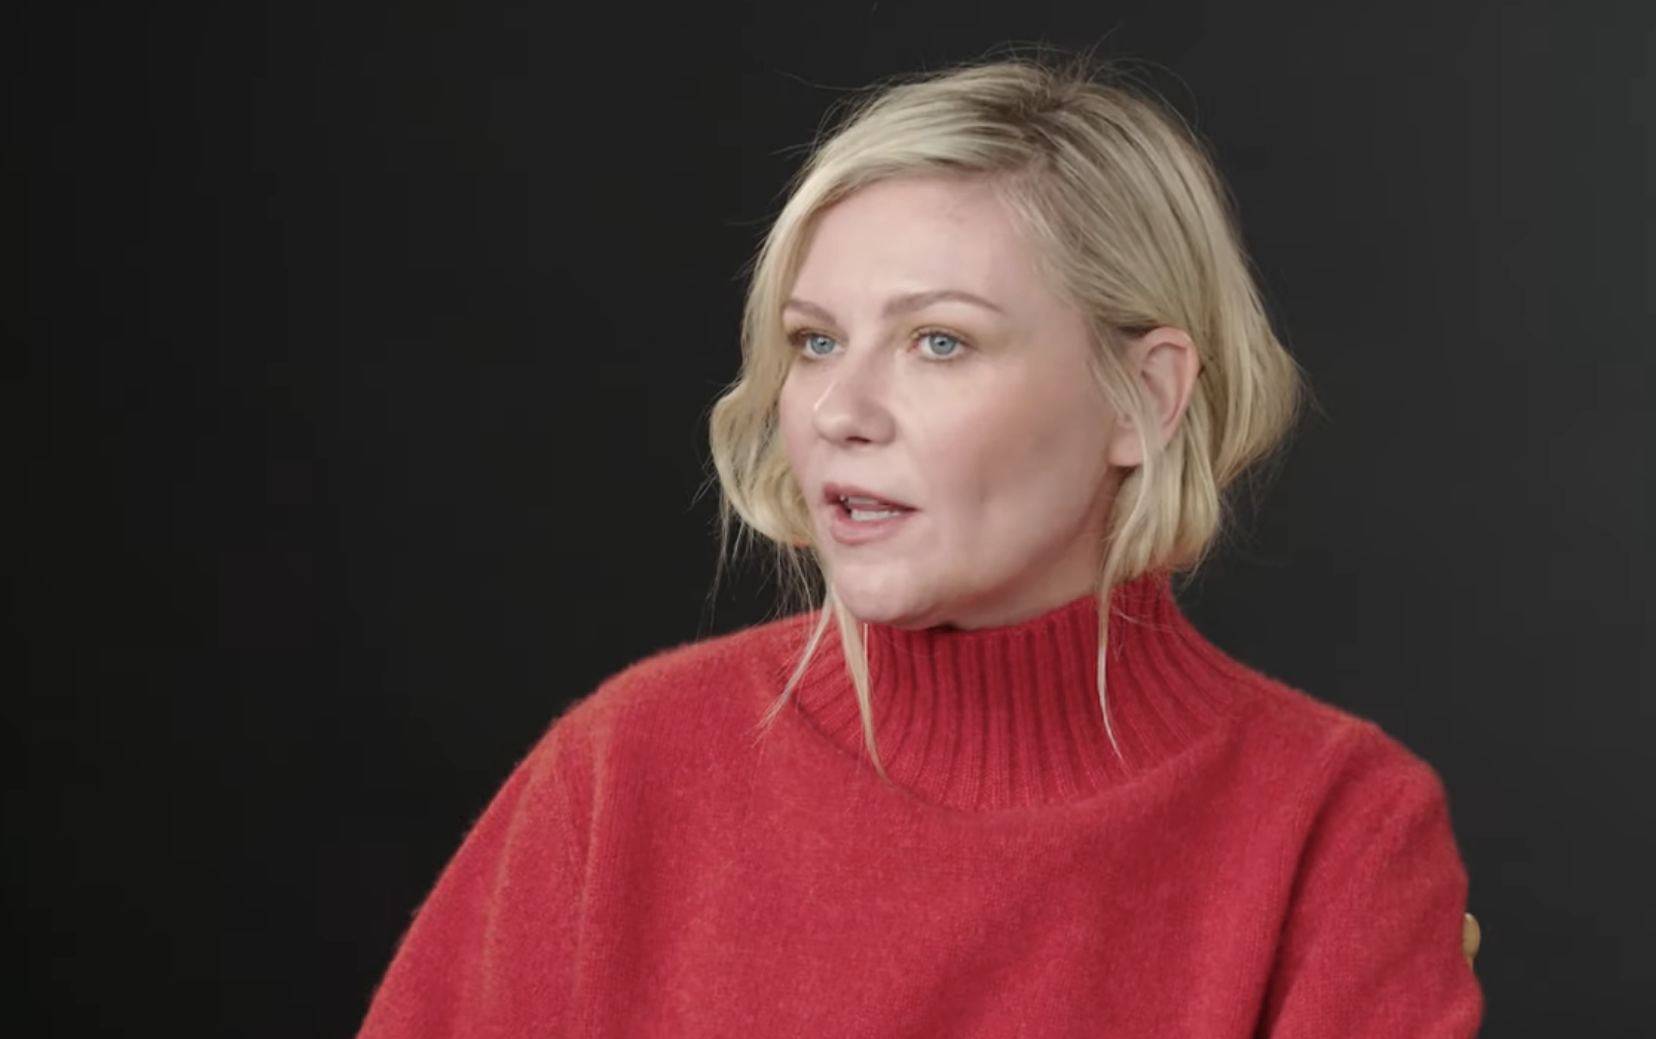 Kristen Dunst in red top speaks in a video titled &quot;Kristen Dunst Breaks Down Her Most Iconic Characters&quot; on YouTube